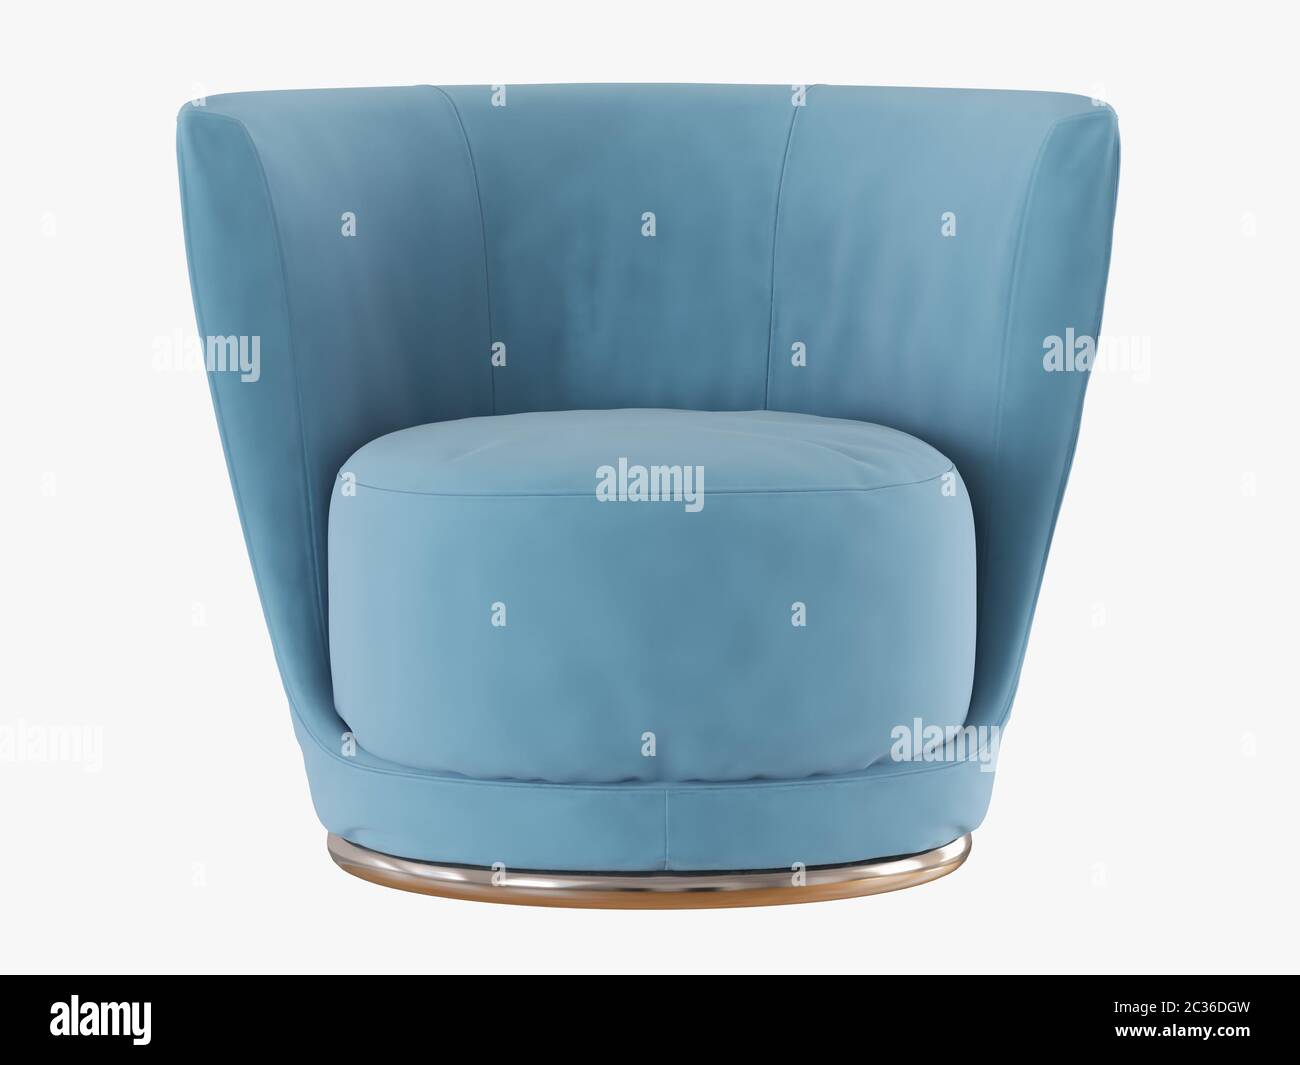 Blue armchair with a round seat frontal view on a white background 3d rendering Stock Photo